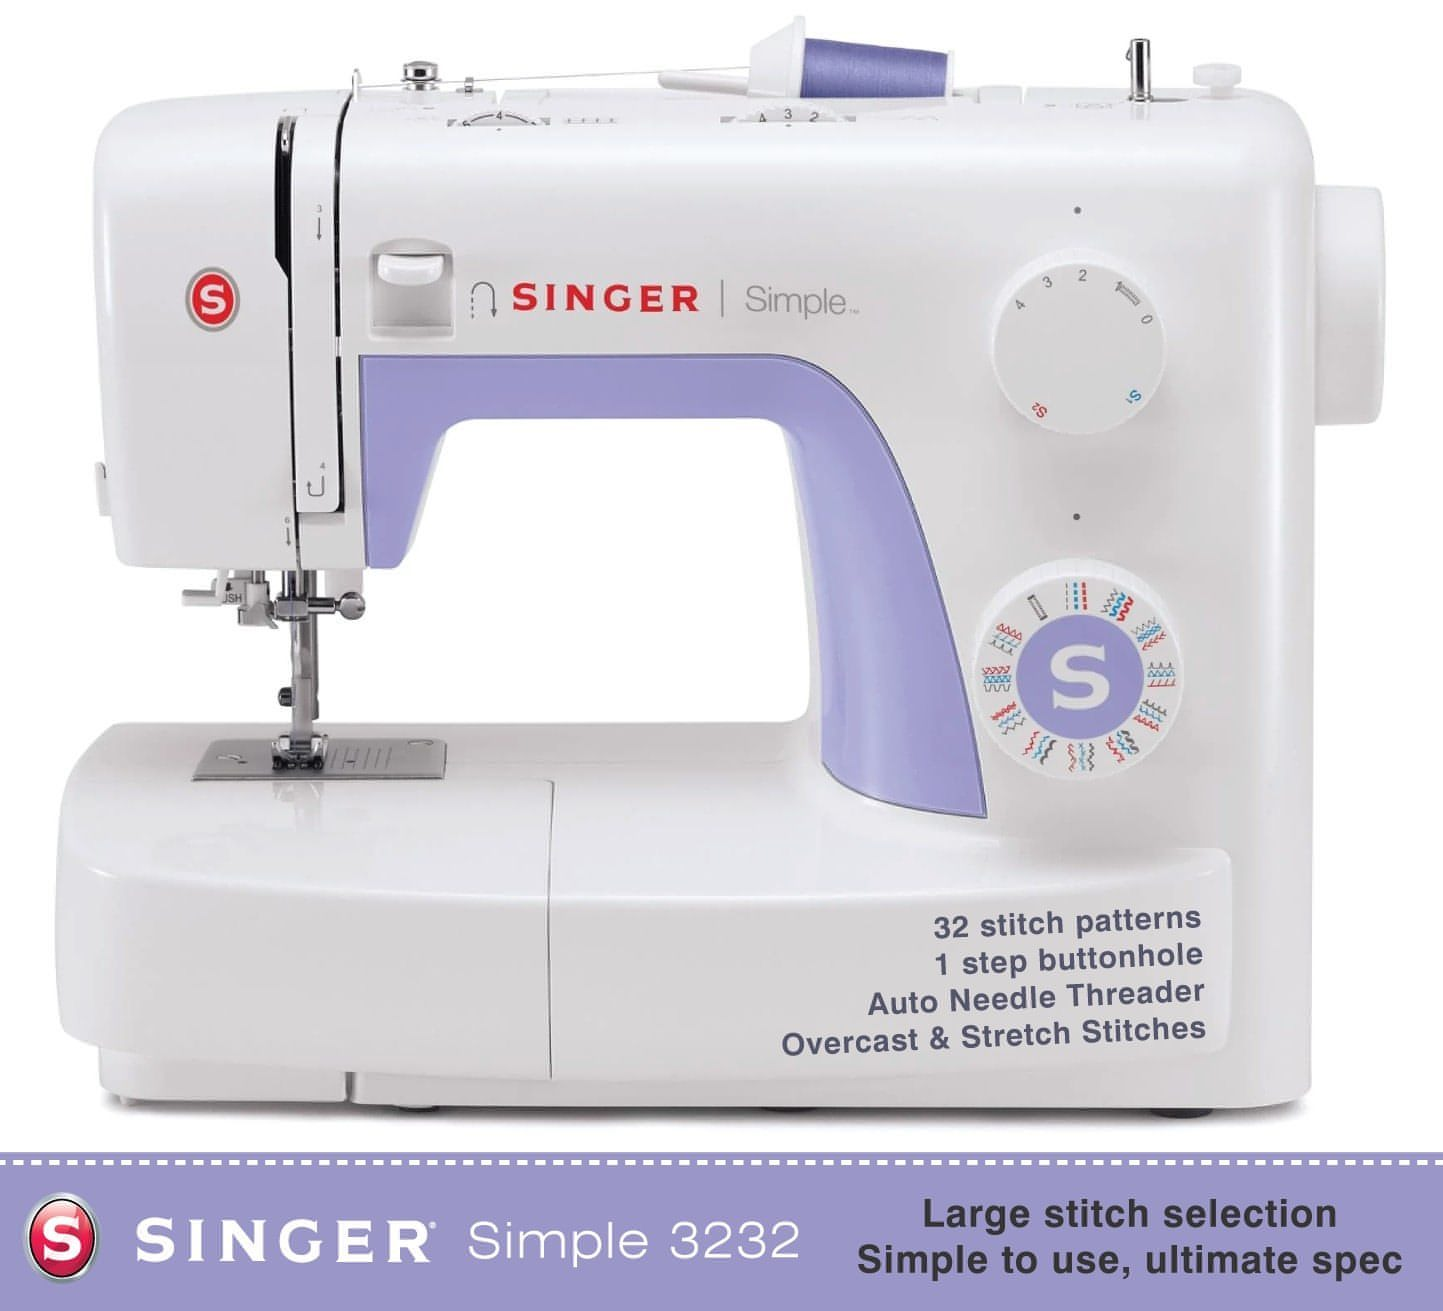 How to Use the Singer Handy Stitch Sewing Maching - Part 1 